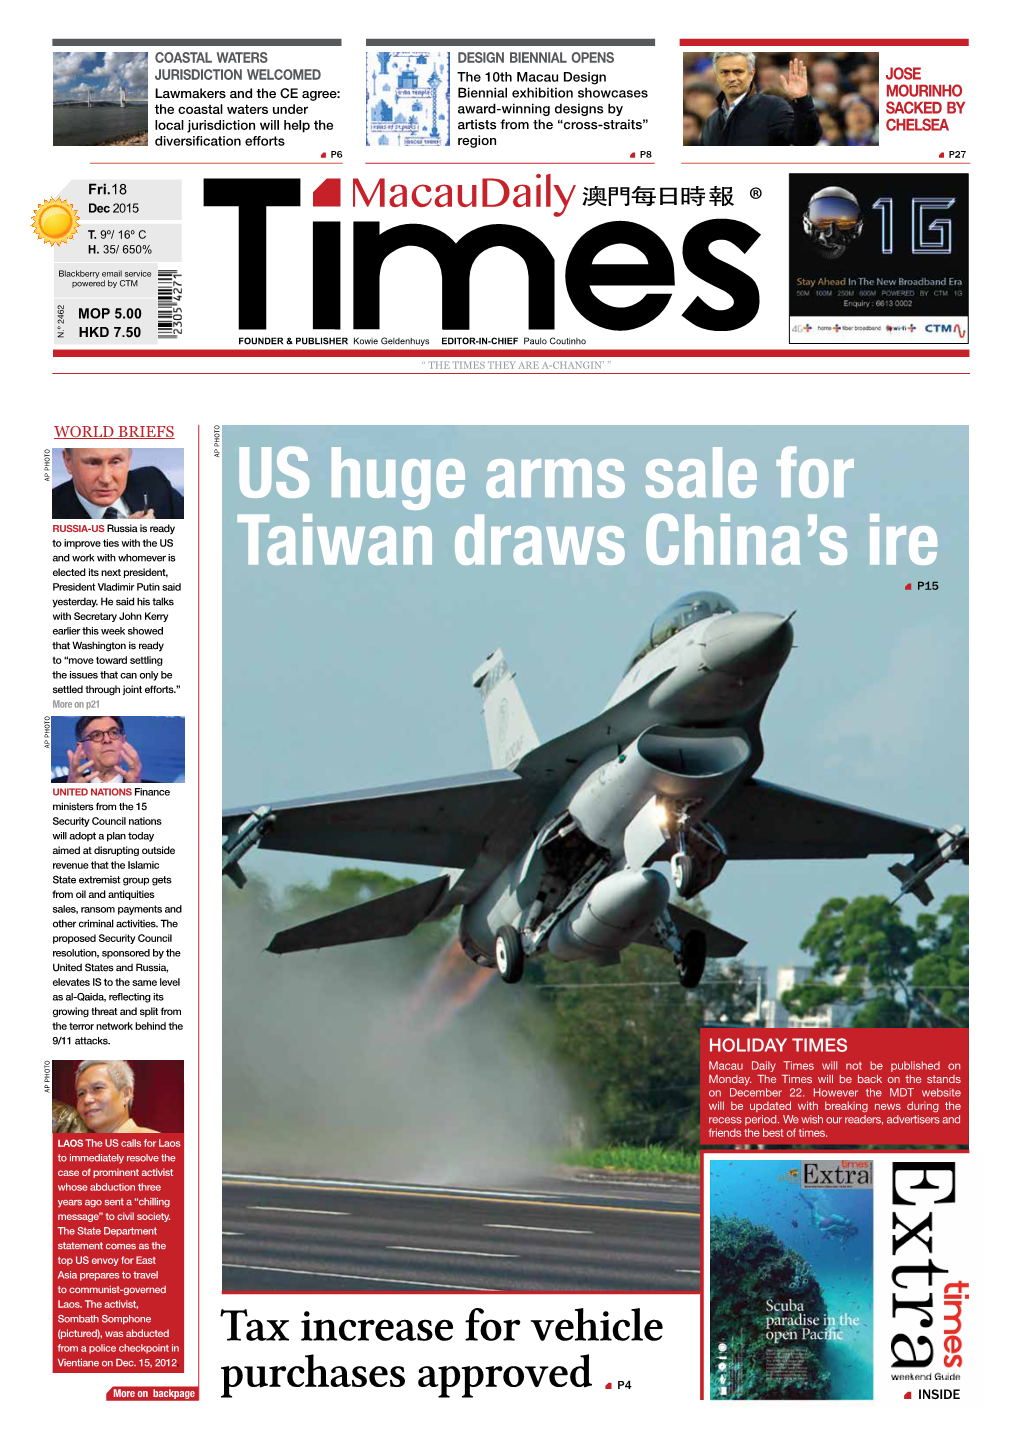 US Huge Arms Sale for Taiwan Draws China's